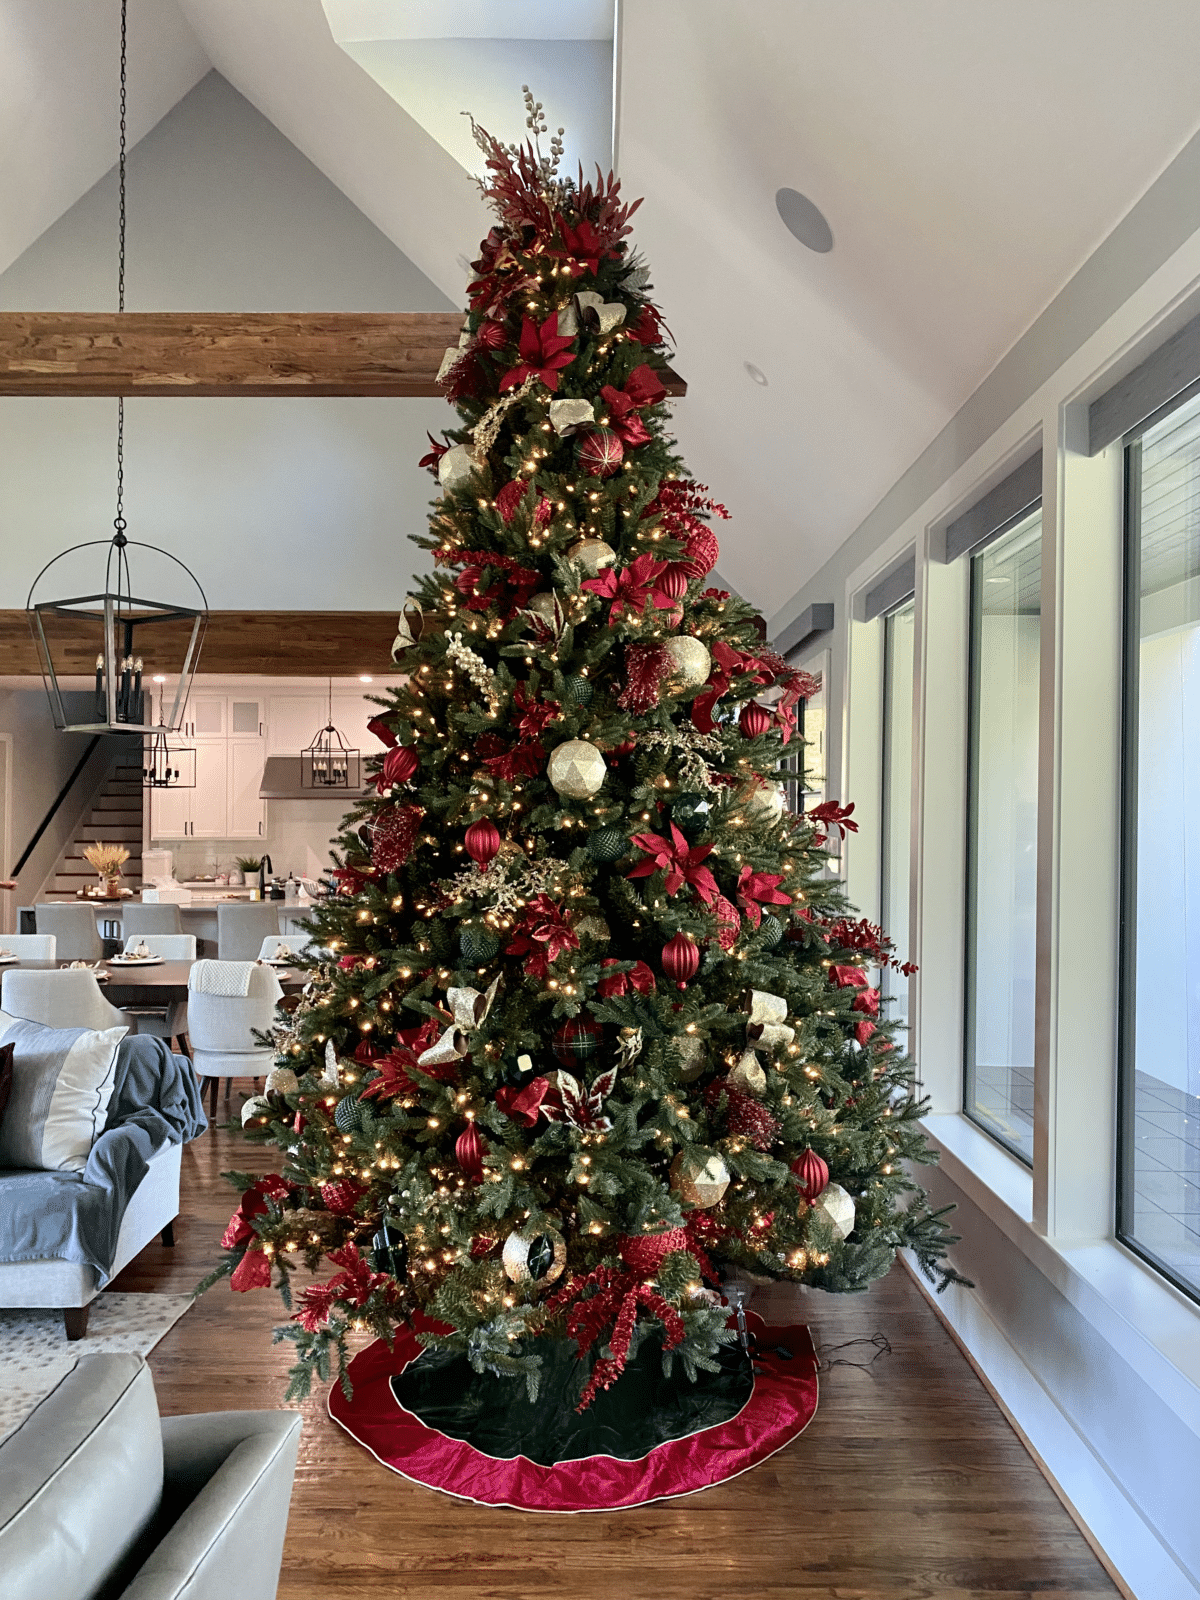 Baker Design Group - A Few Of Our Favorite Things: Christmas Edition